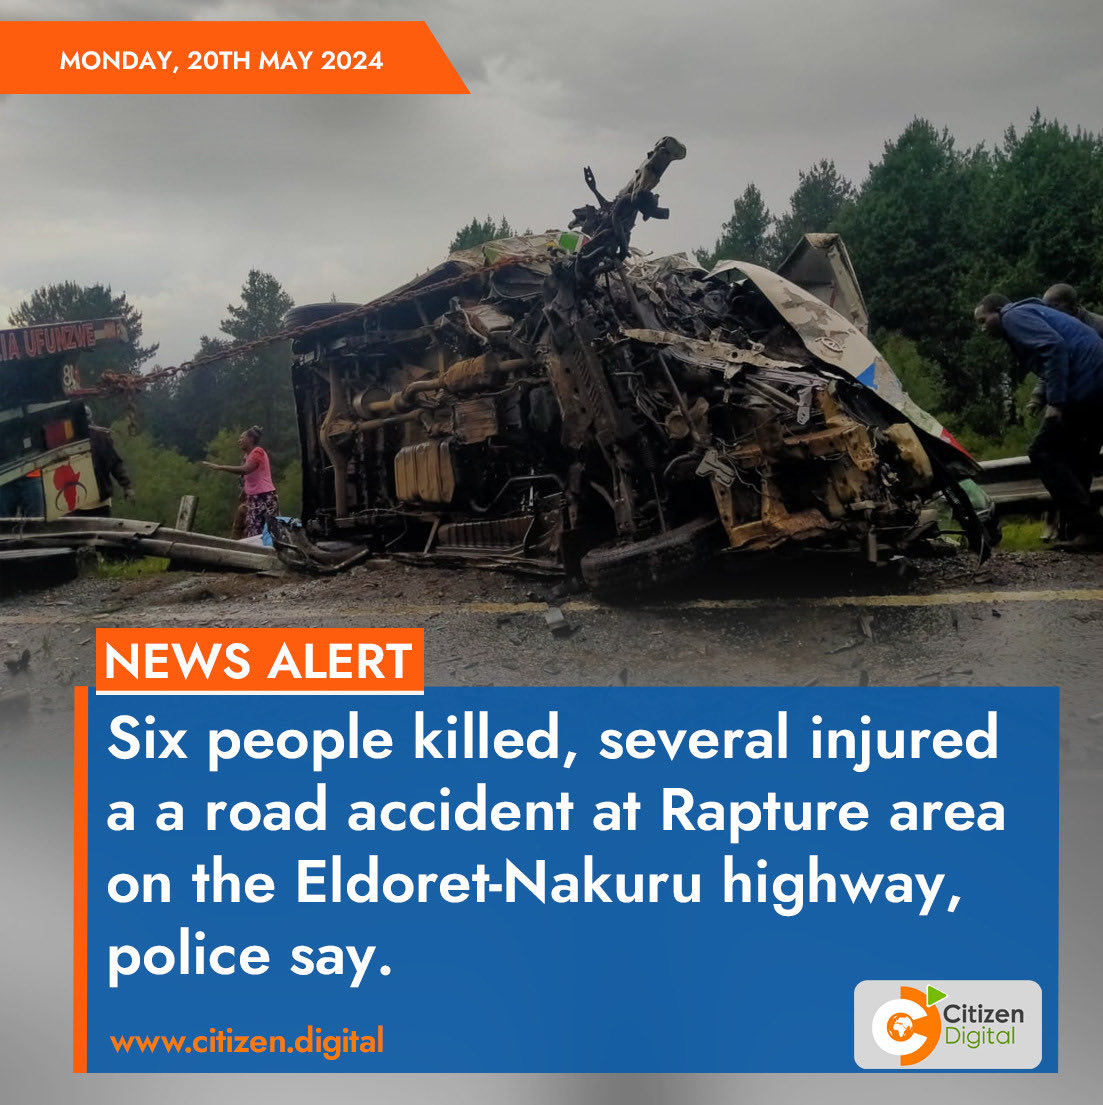 Six people killed, several injured in a road accident at Rapture area on the Eldoret-Nakuru highway, police say. citizen.digital